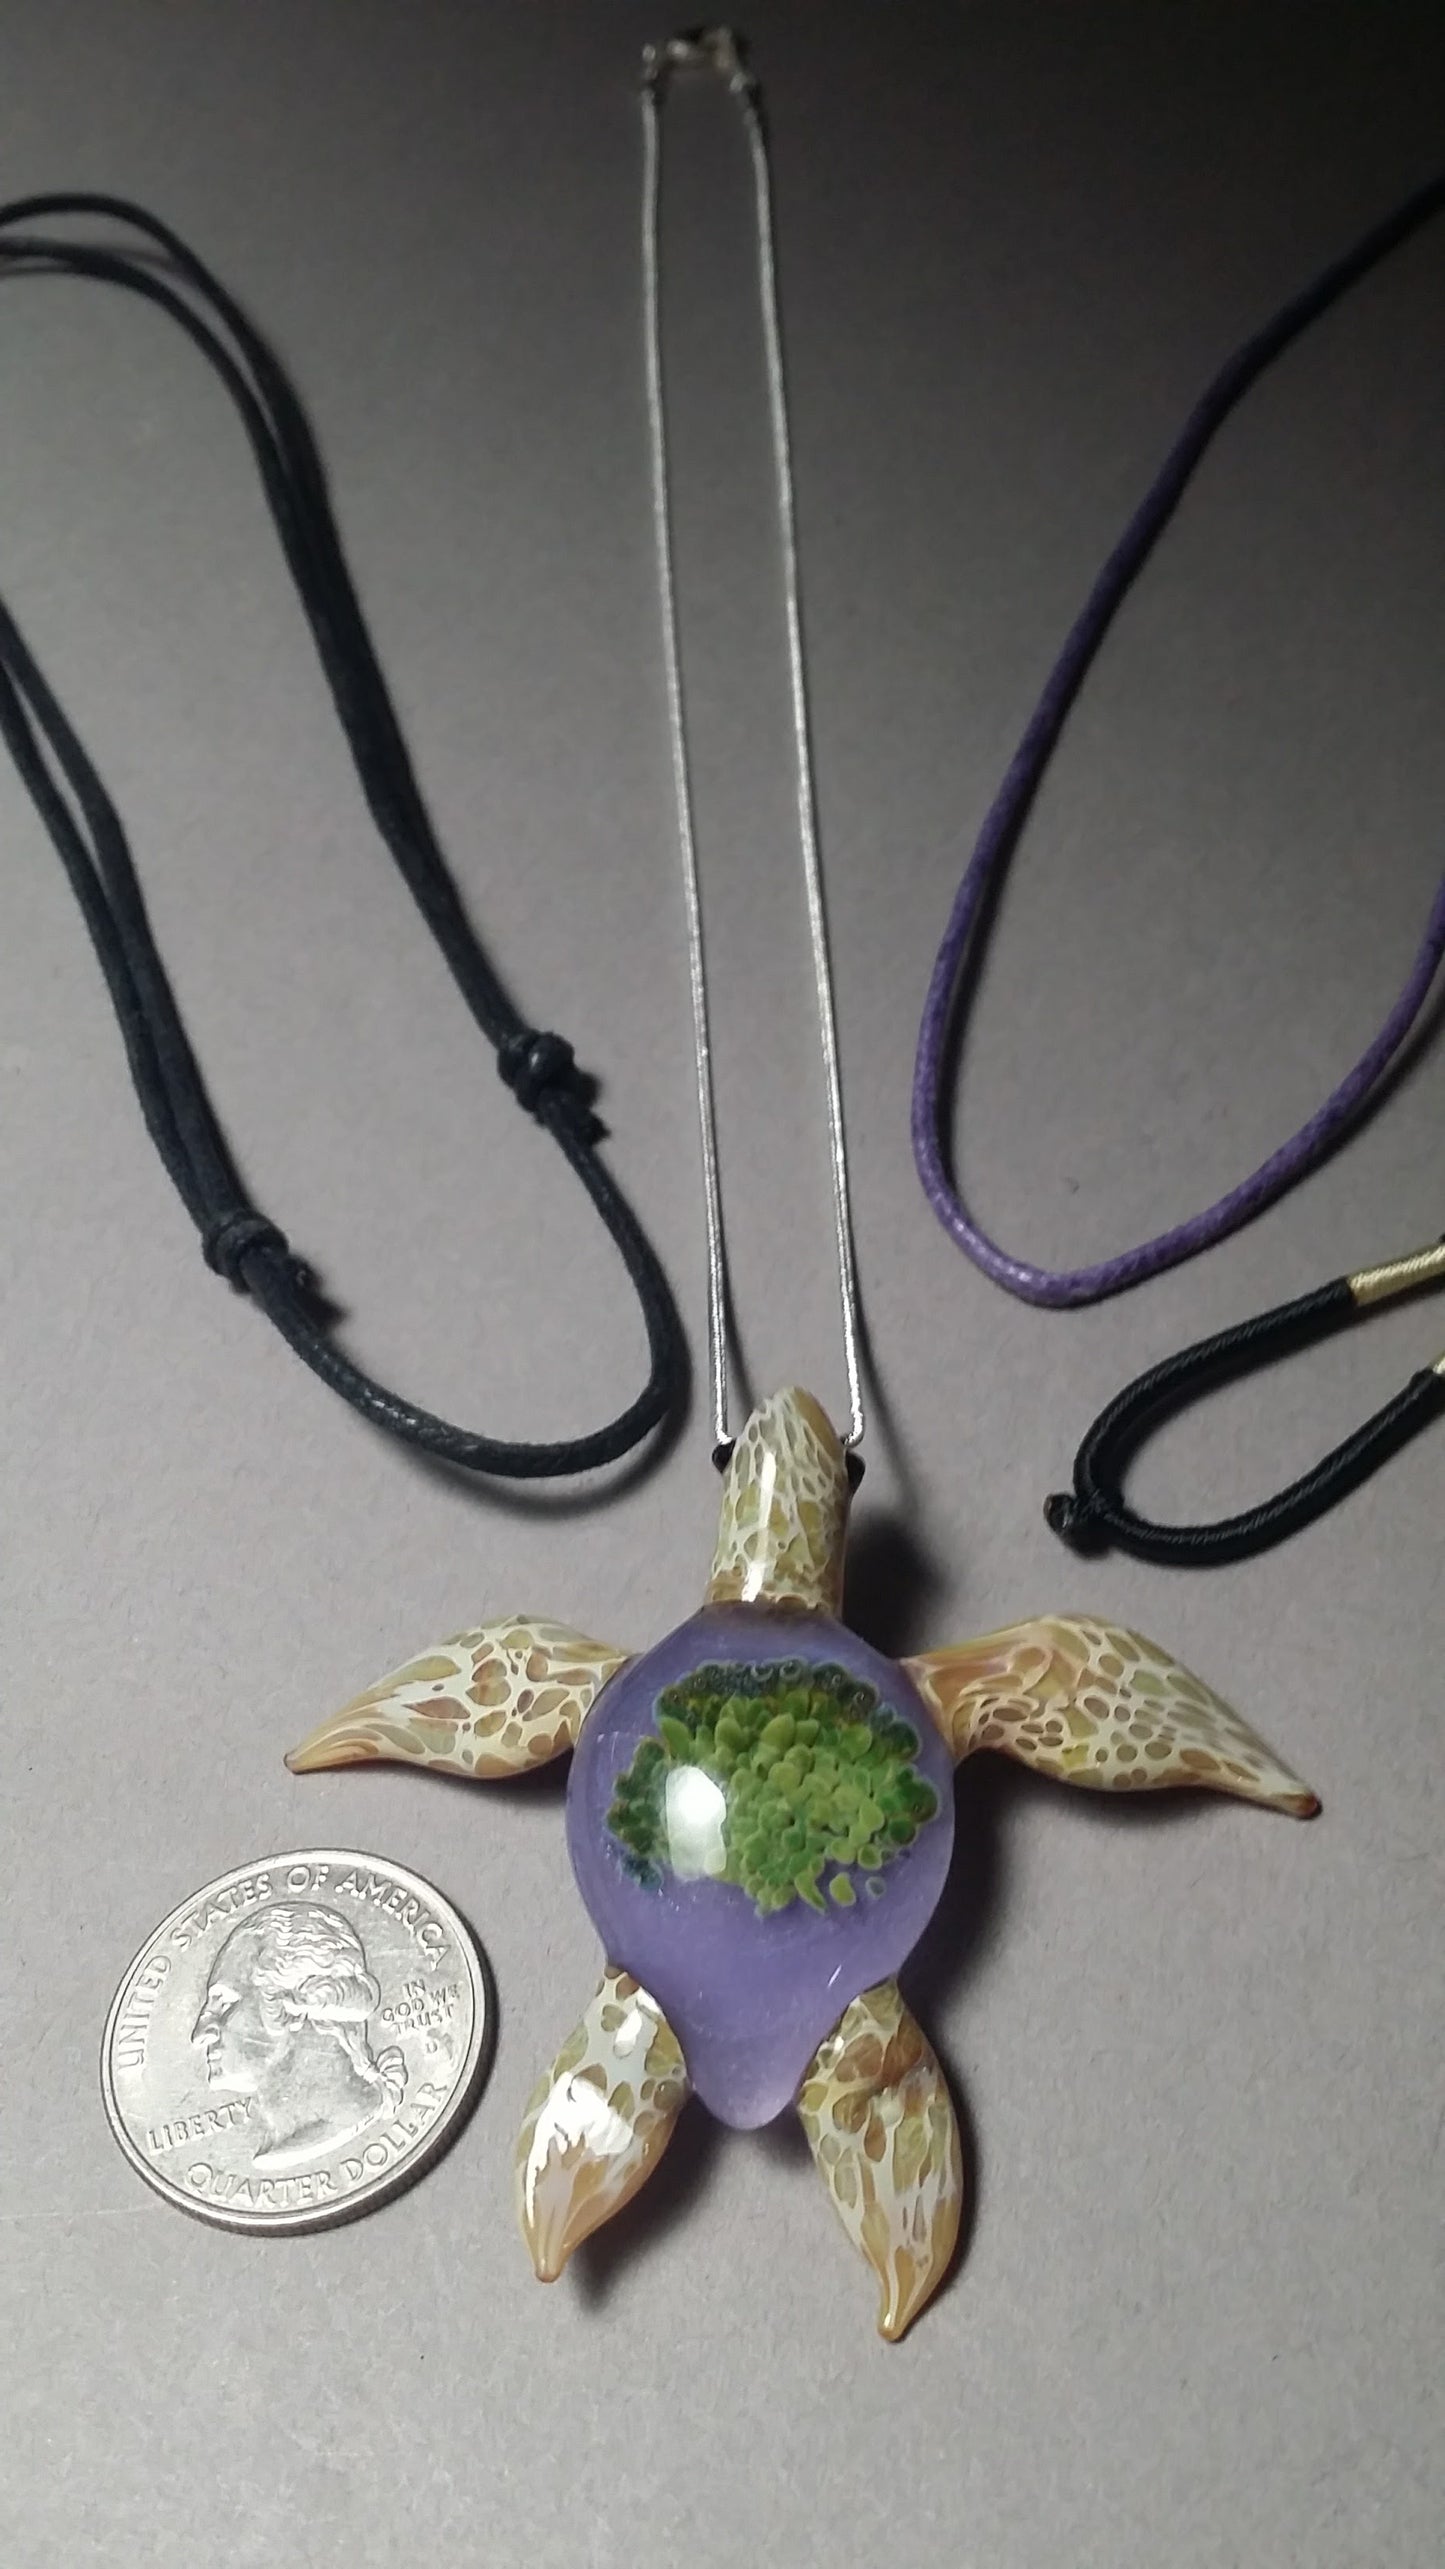 Special edition periwinkle background with green anemones in a beach blonde glass sea turtle pendant - GLASSnFIRE